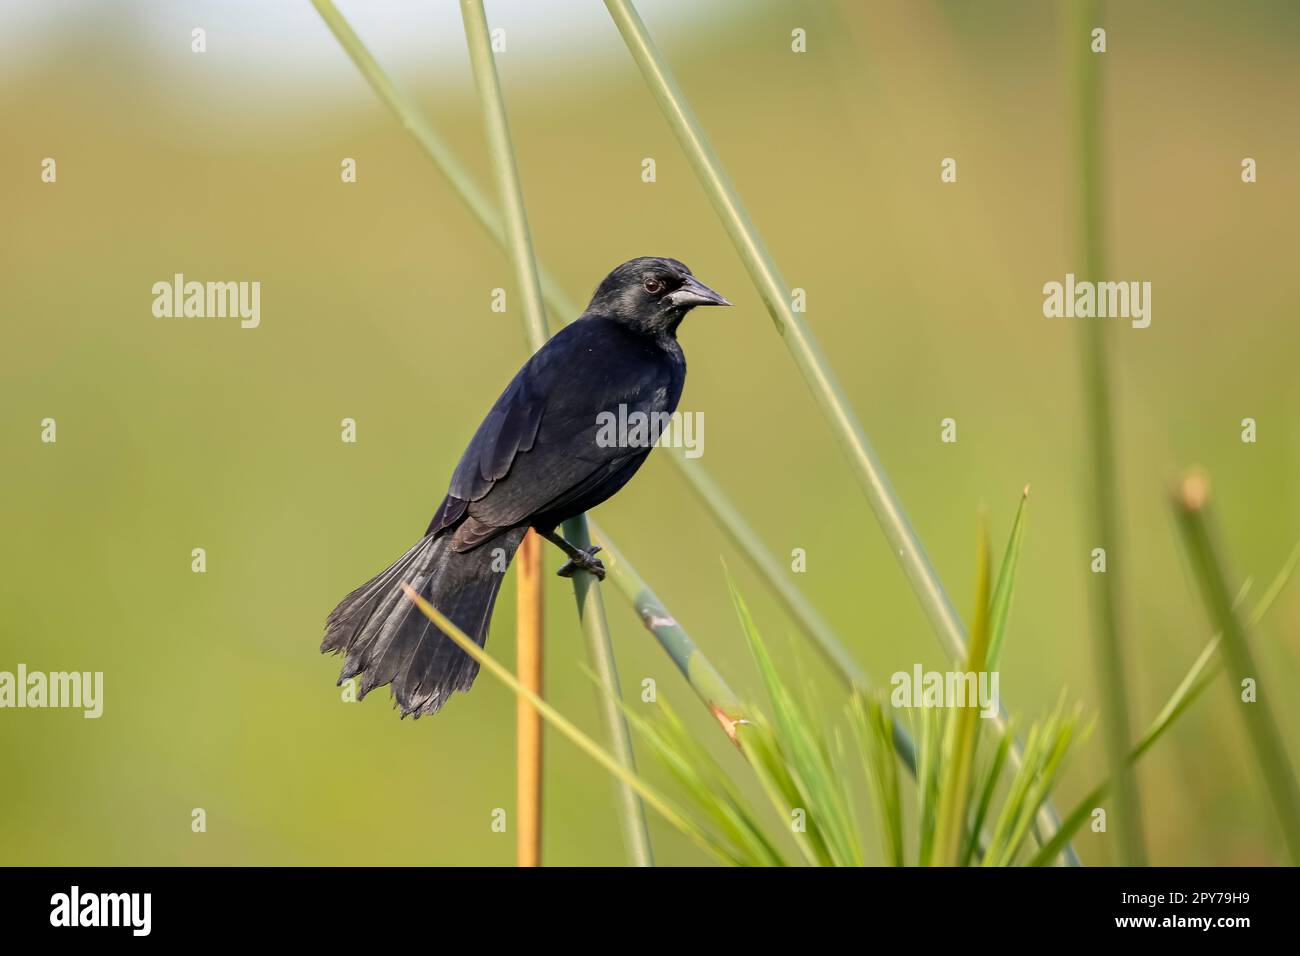 Chopi Blackbird perched on a reeds stalk against green background, Pantanal Wetlands, Mato Grosso, Brazil Stock Photo